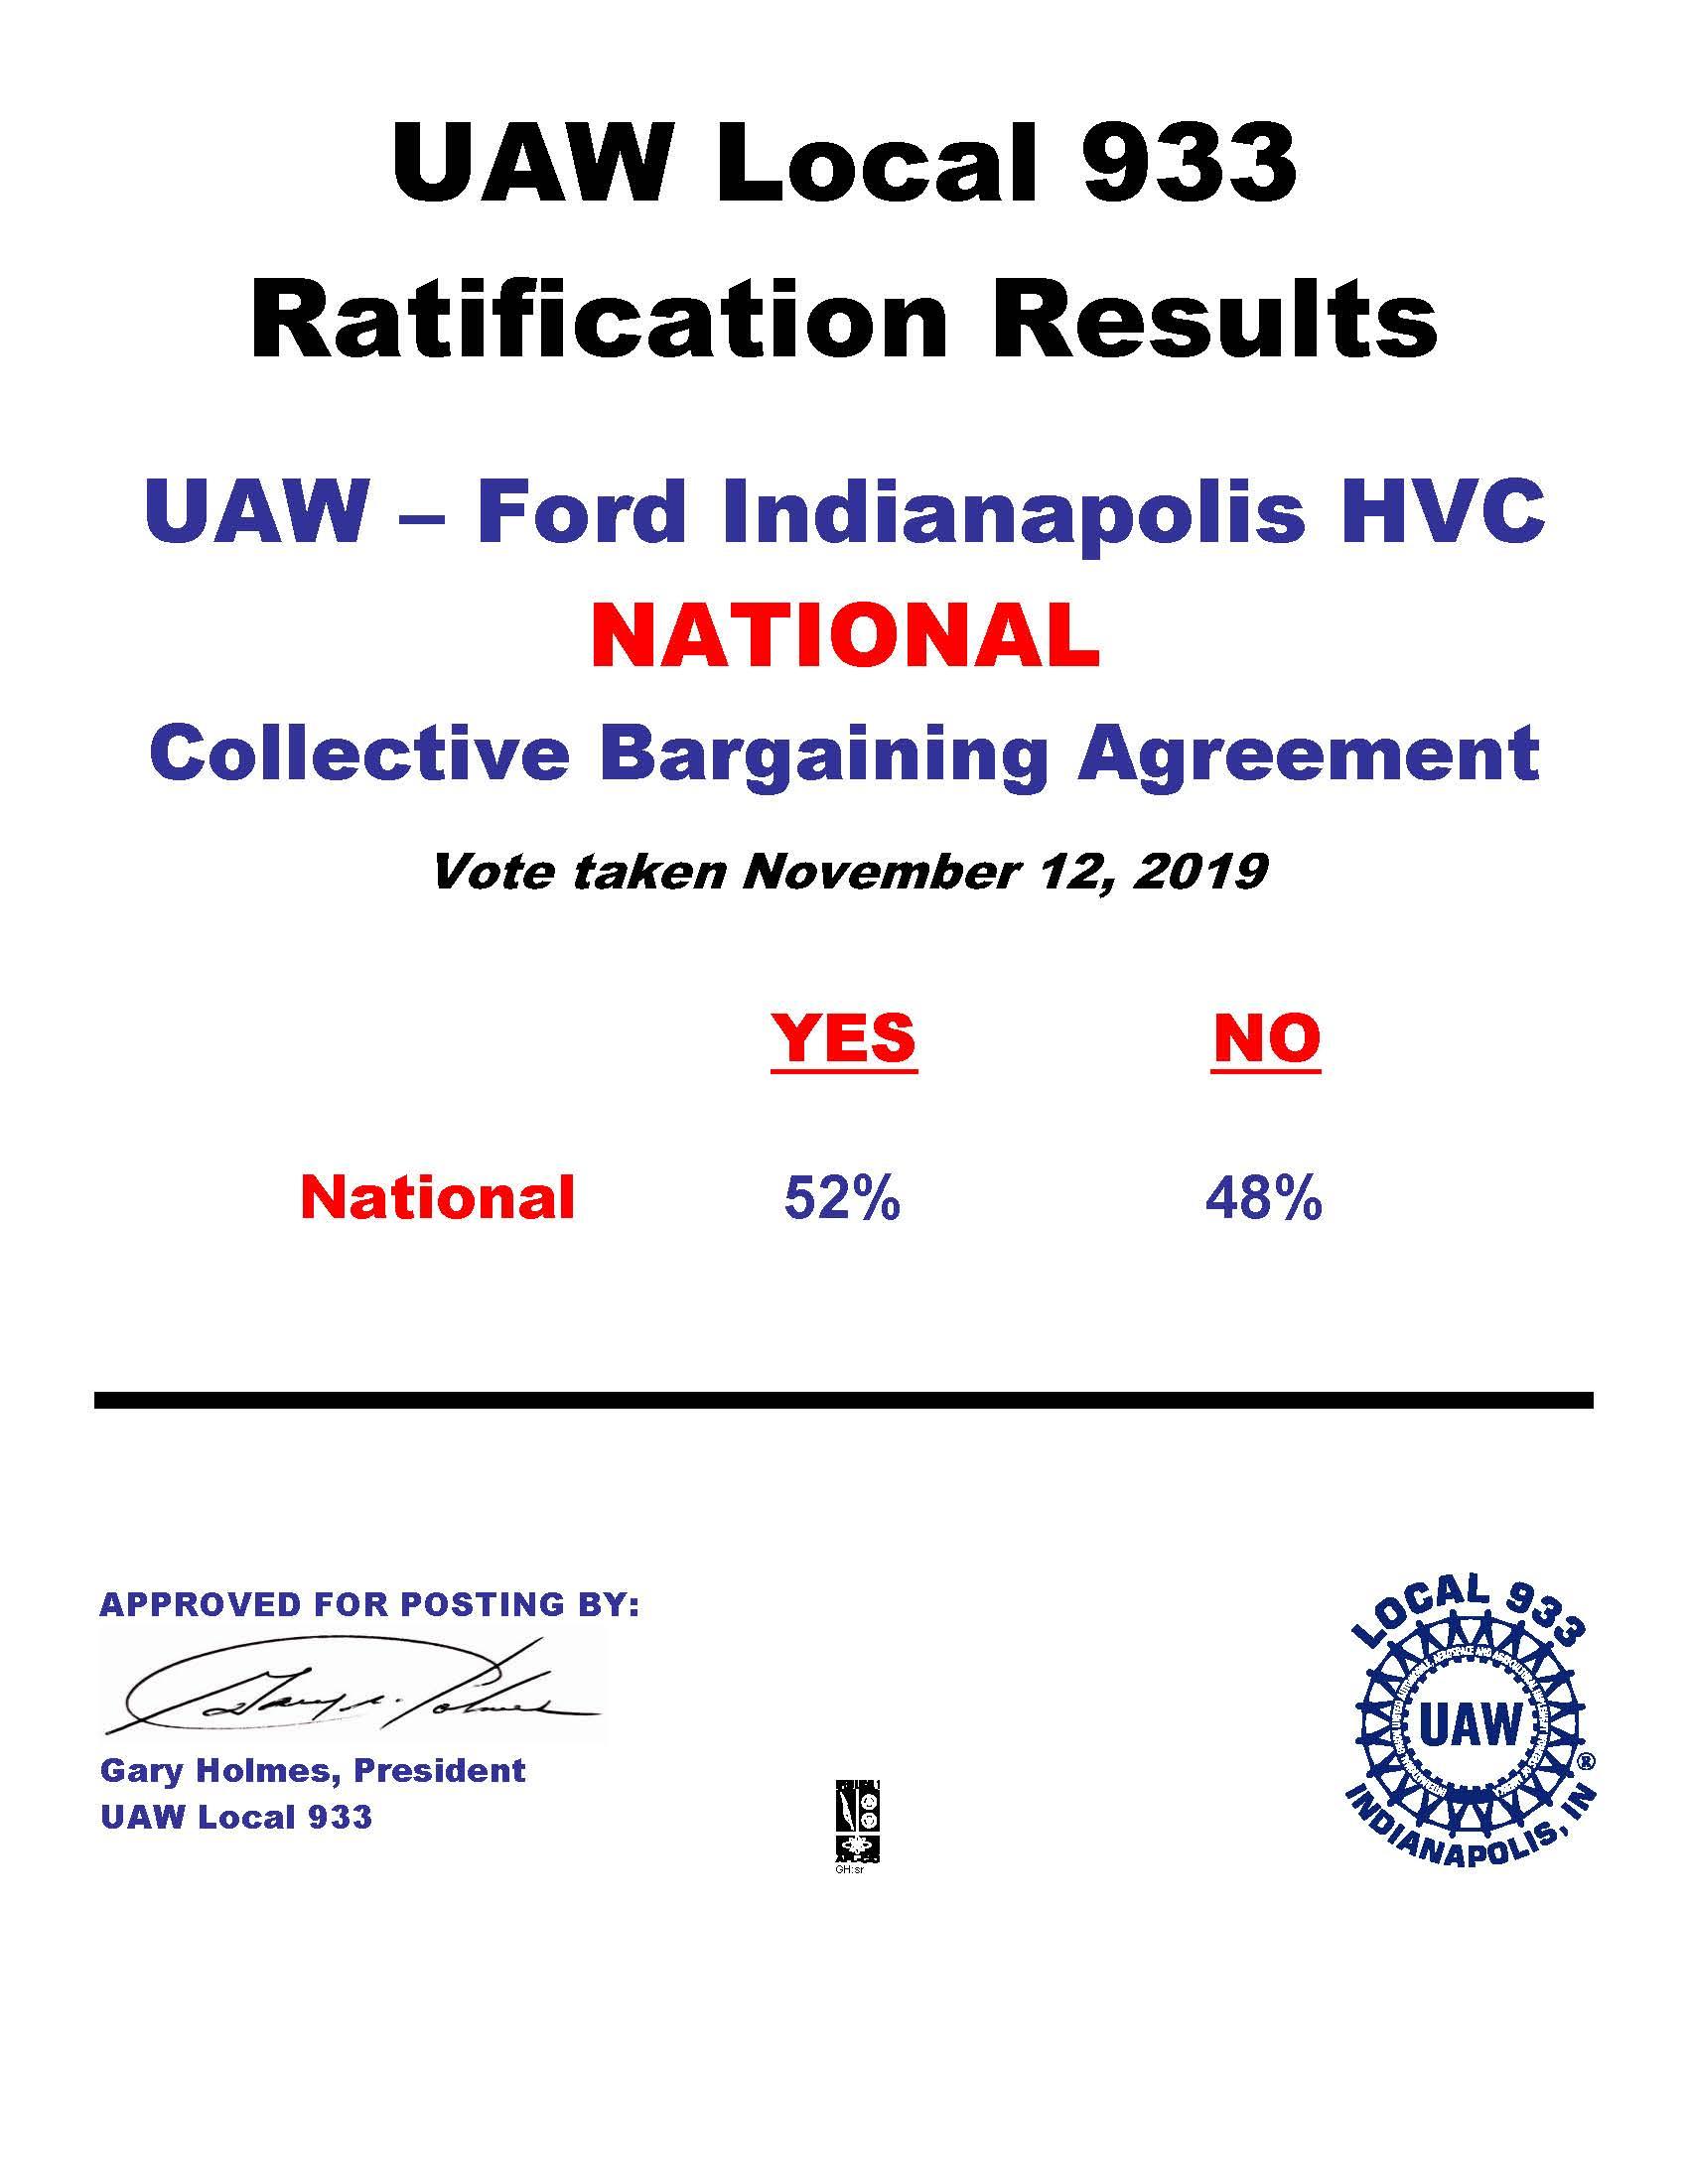 Ford IHVC Unit Ratification Results UAW Local 933